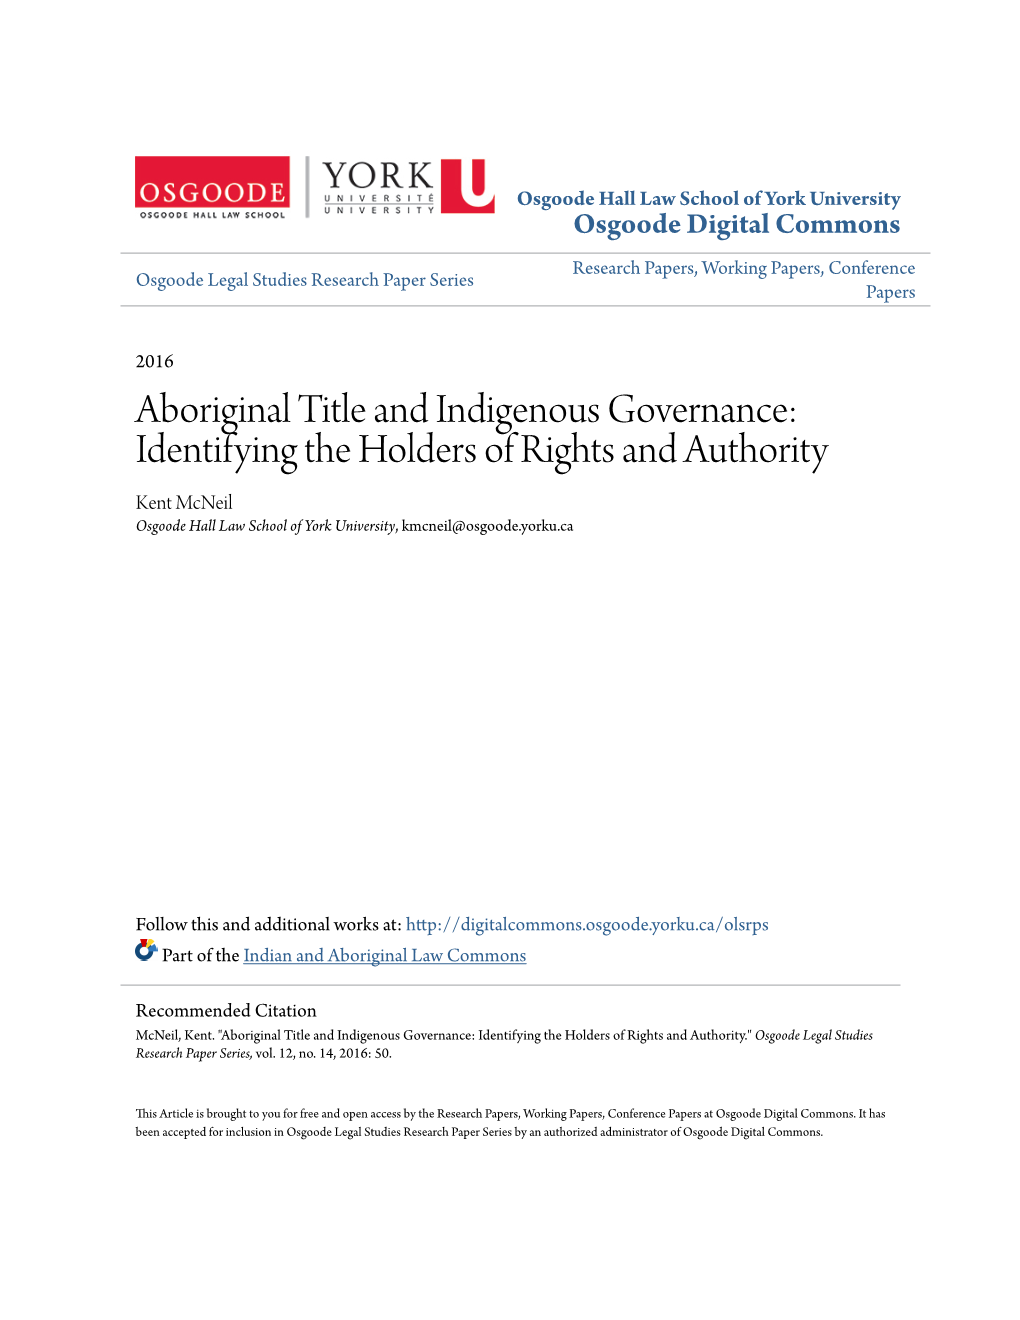 Aboriginal Title and Indigenous Governance